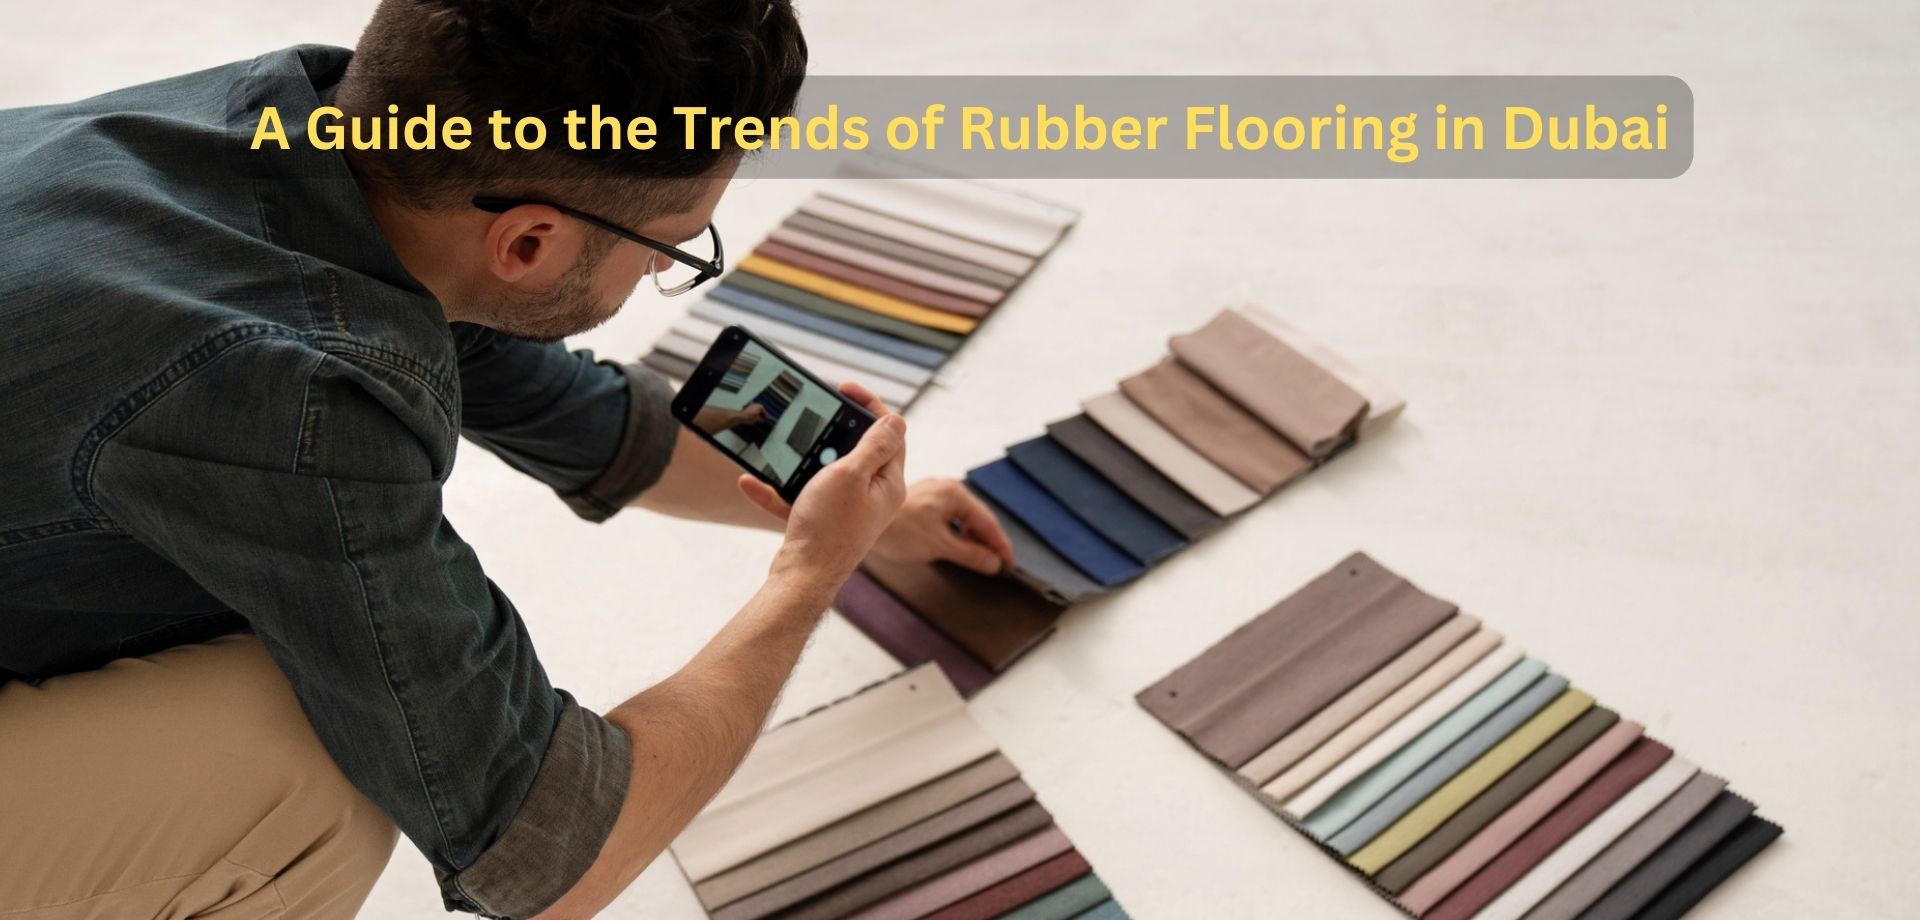 A Guide to the Trends of Rubber Flooring in Dubai